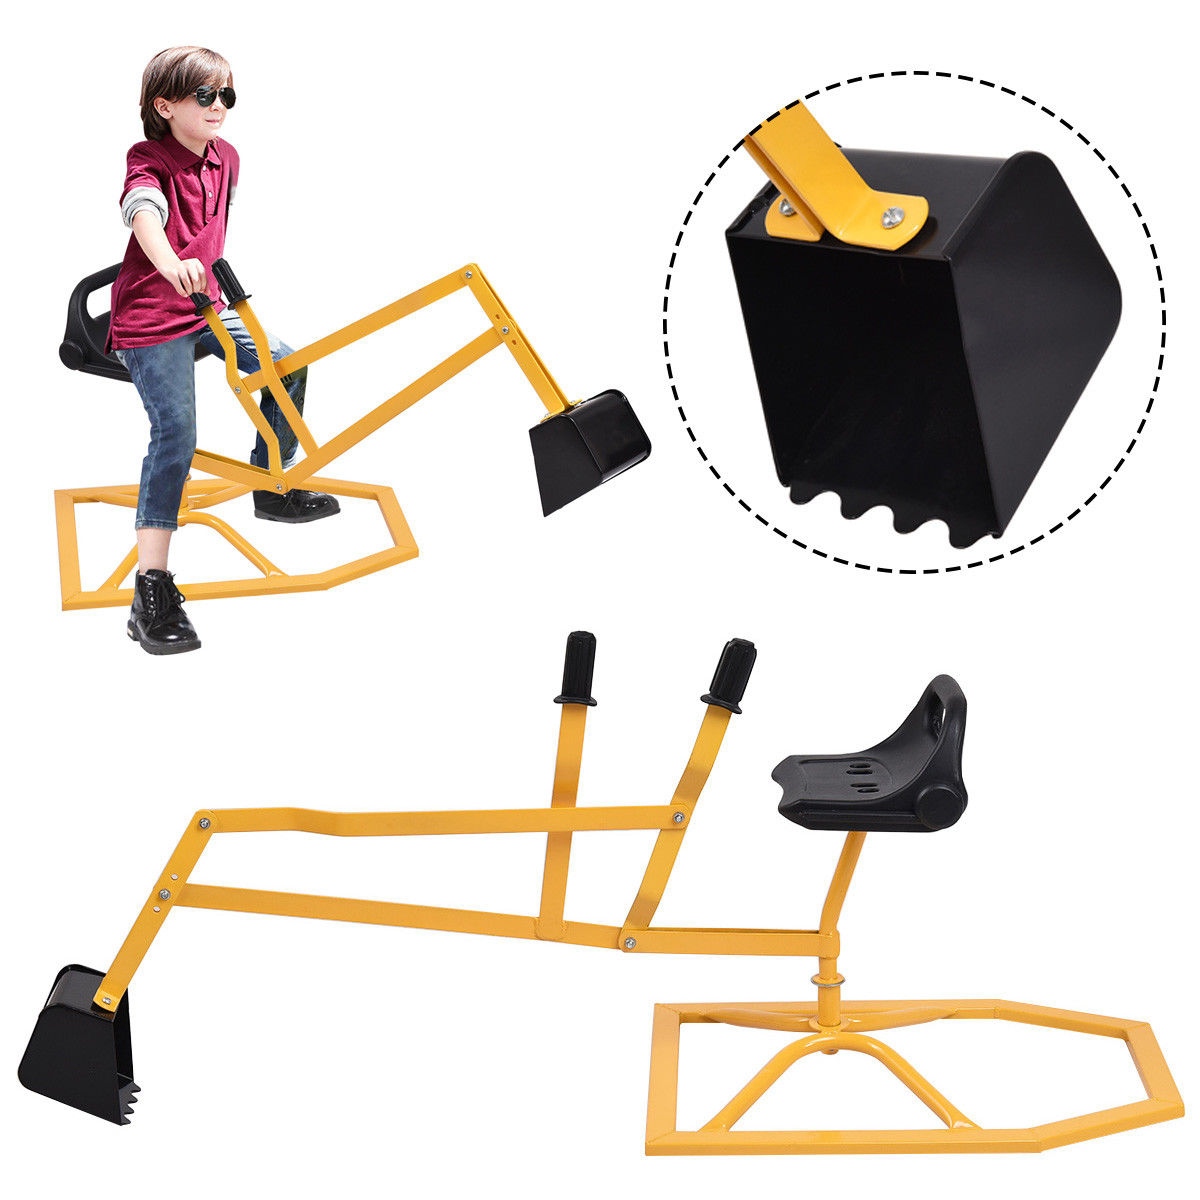 Heavy Duty Kid Ride-on Sand Digger Digging Scooper Excavator For Sand Toy